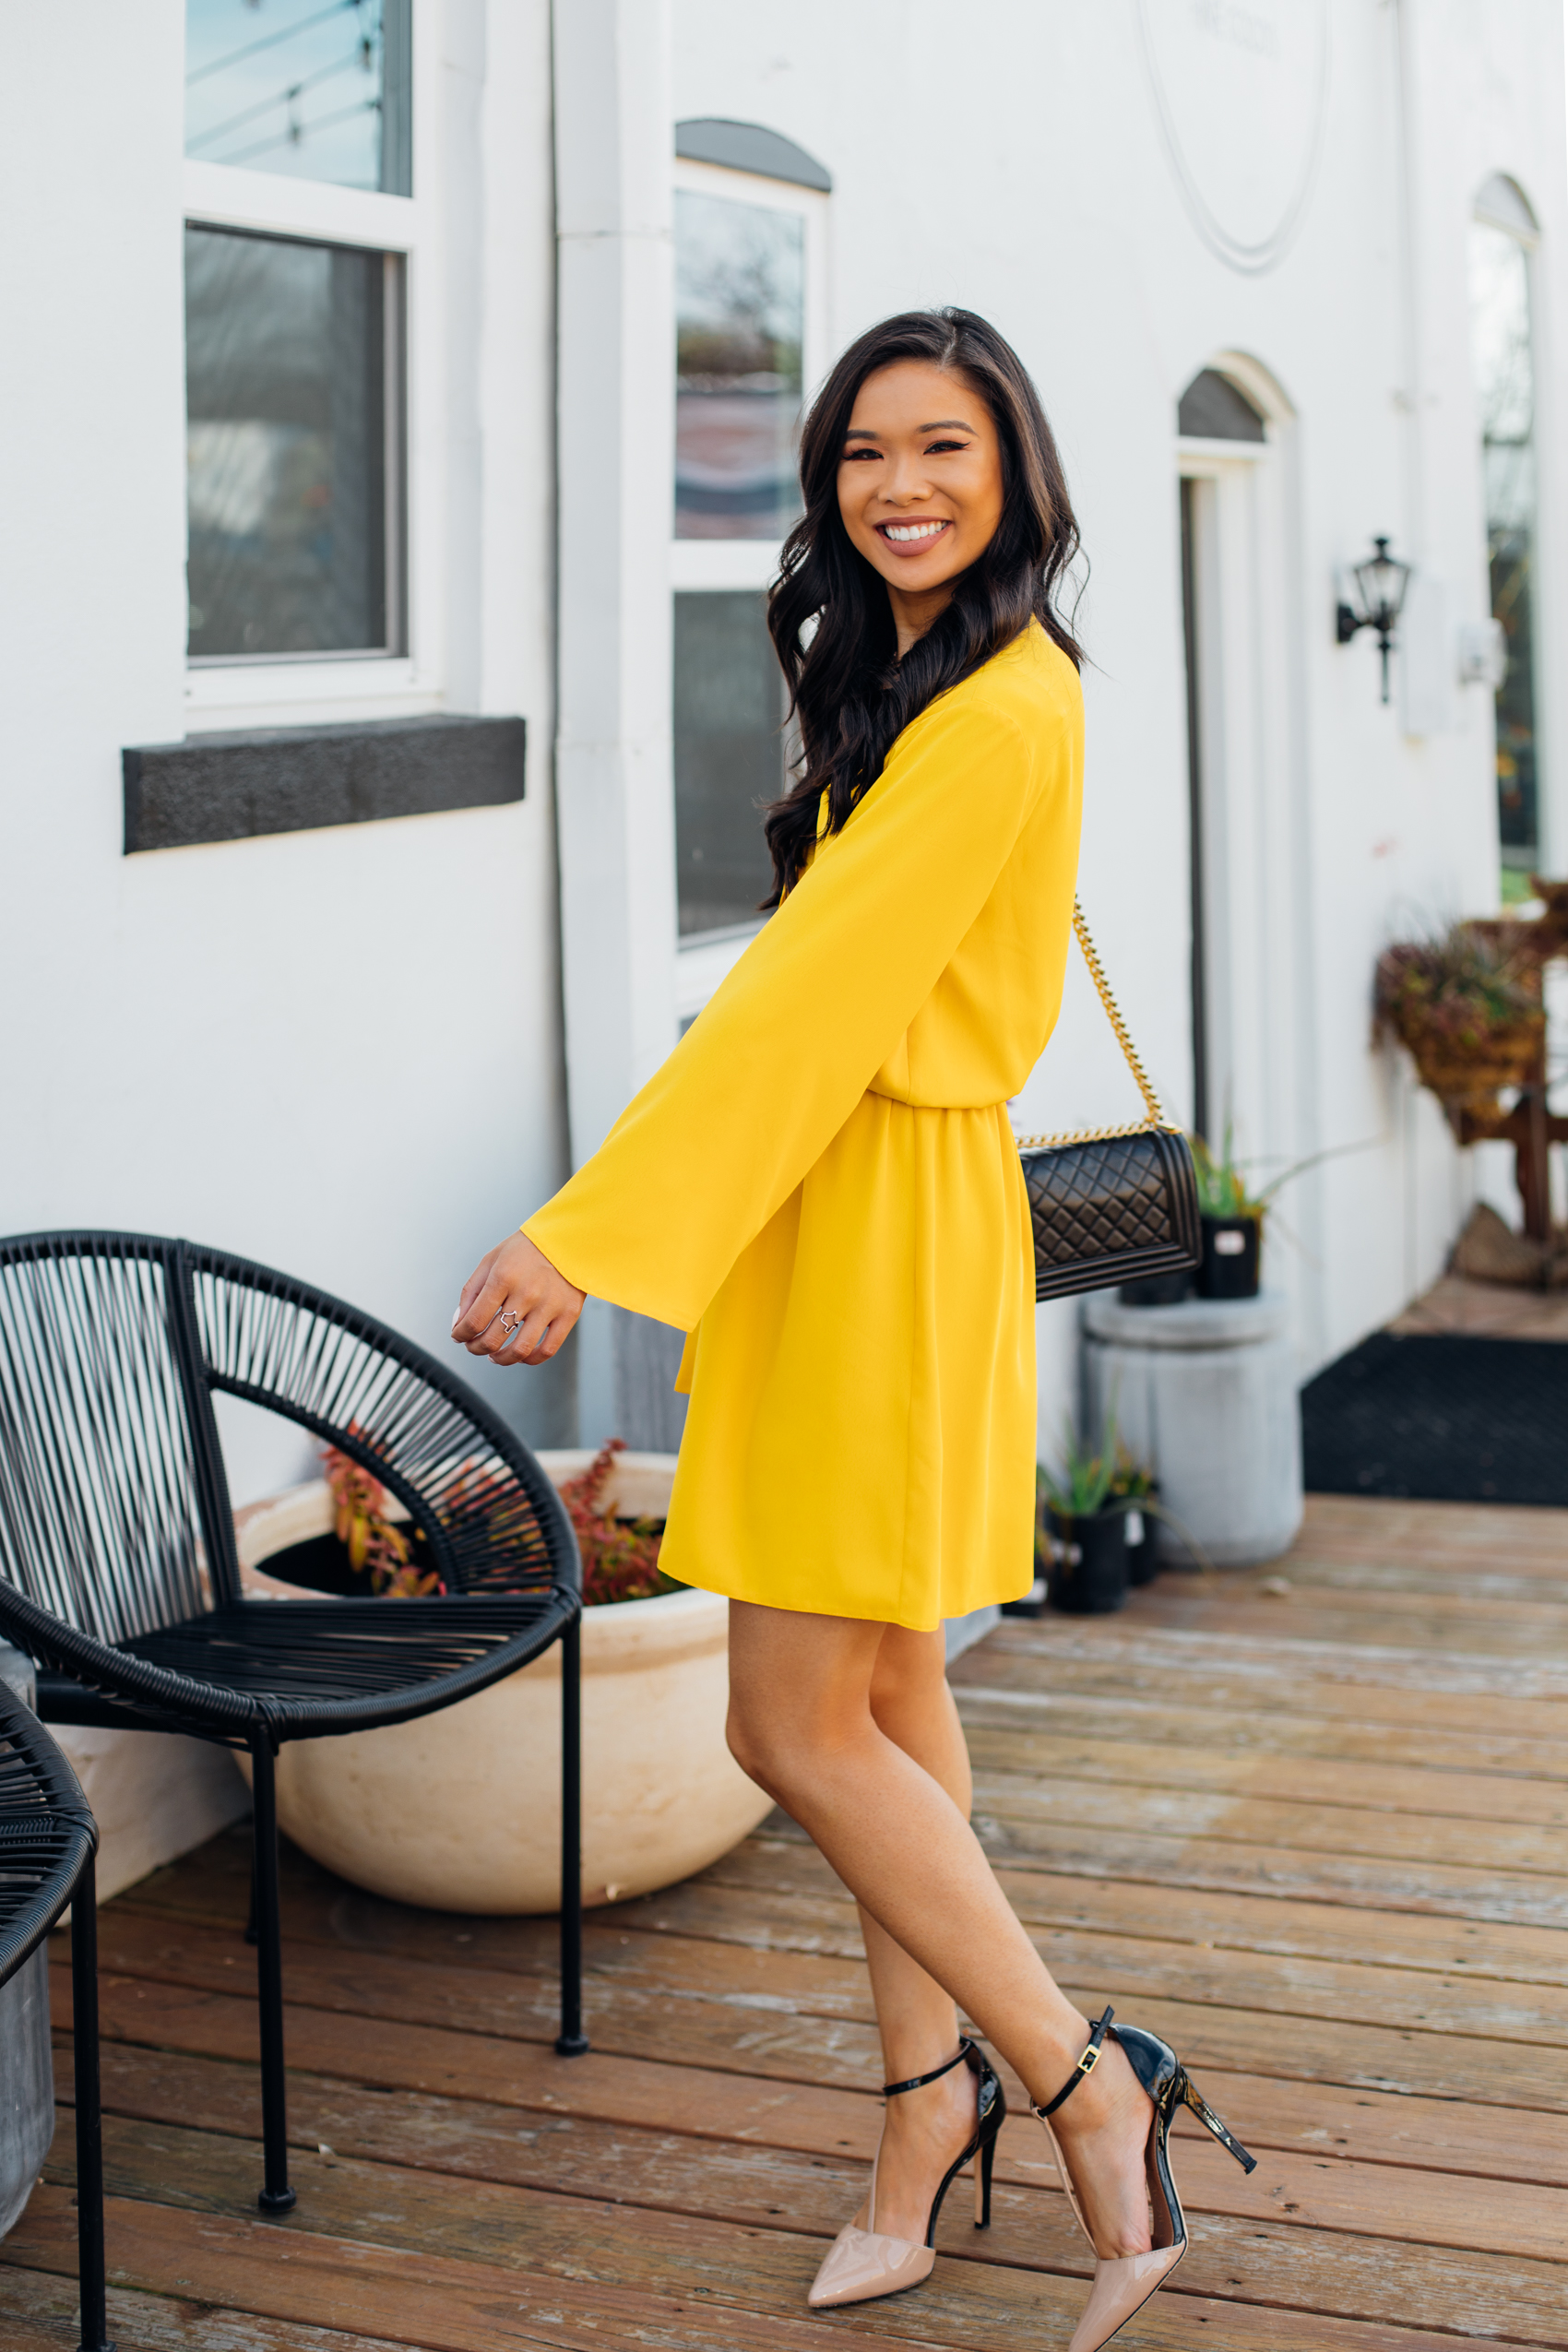 Blogger Hoang-Kim shares a yellow spring dress you can wear anywhere